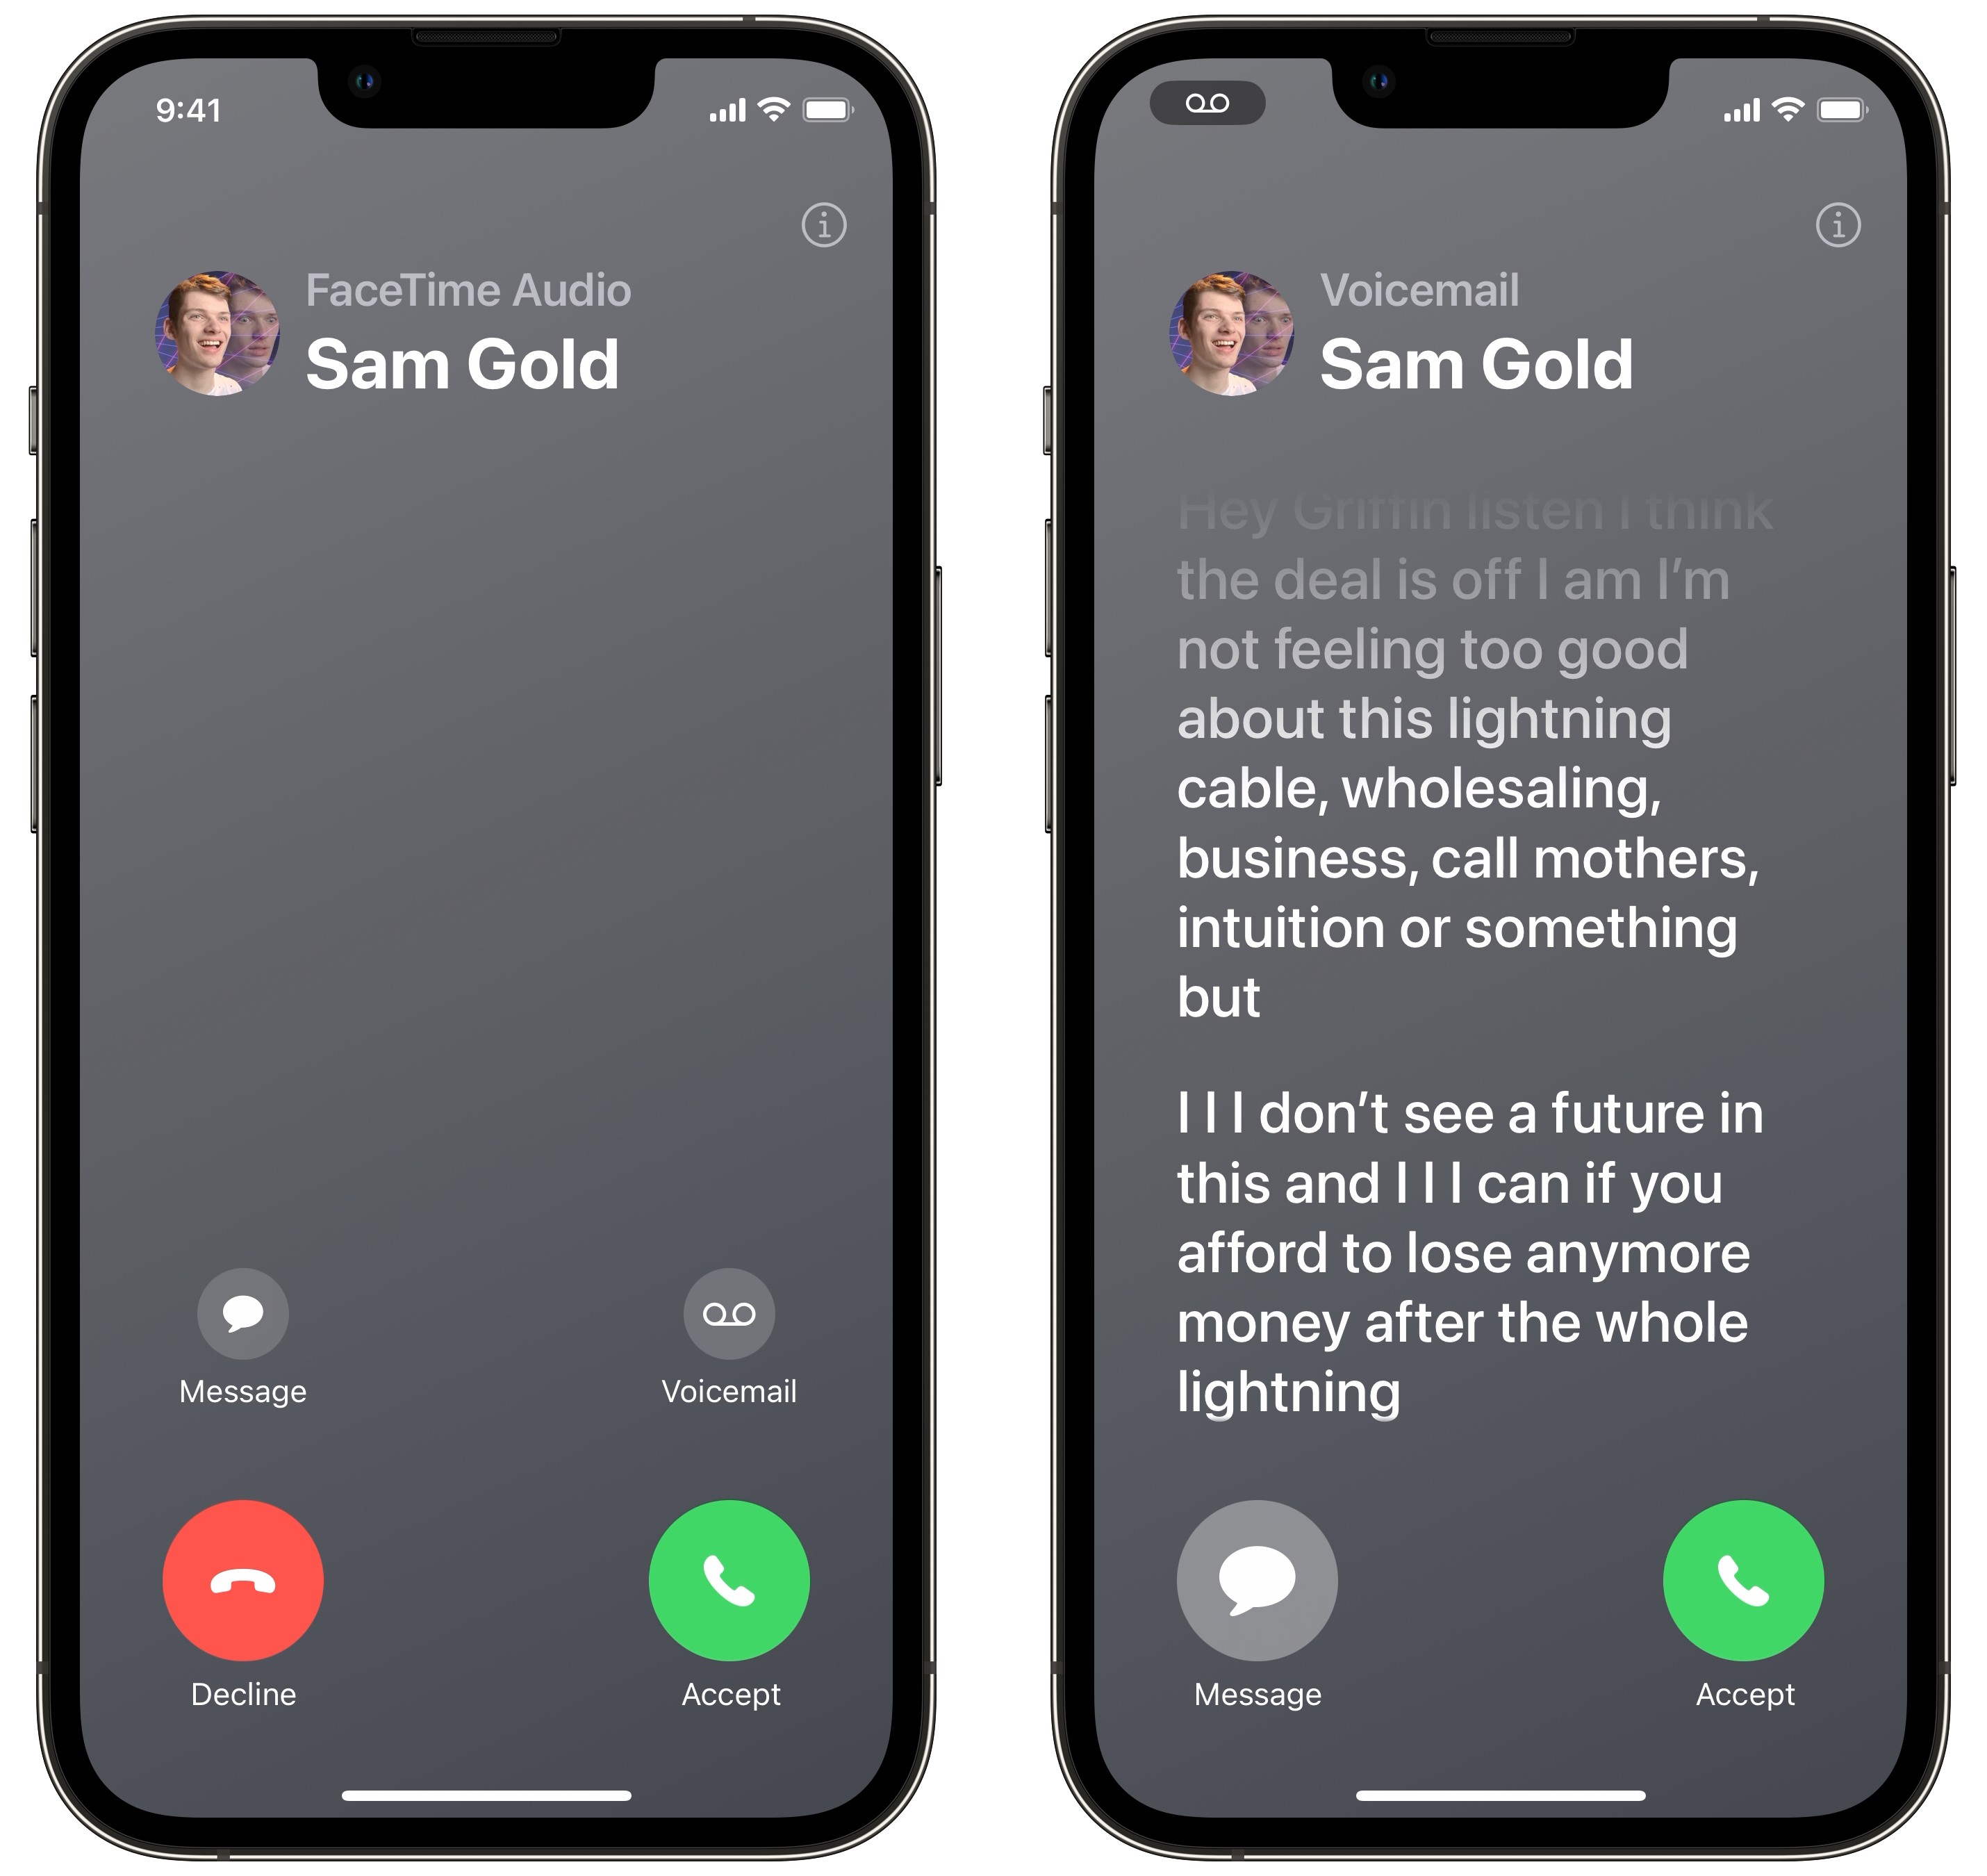 Live voicemail on iOS 17: “Hey Griffin listen I think the deal is off I am I'm not feeling too good about this lightning cable, wholesaling, business, call mothers, intuition or something”